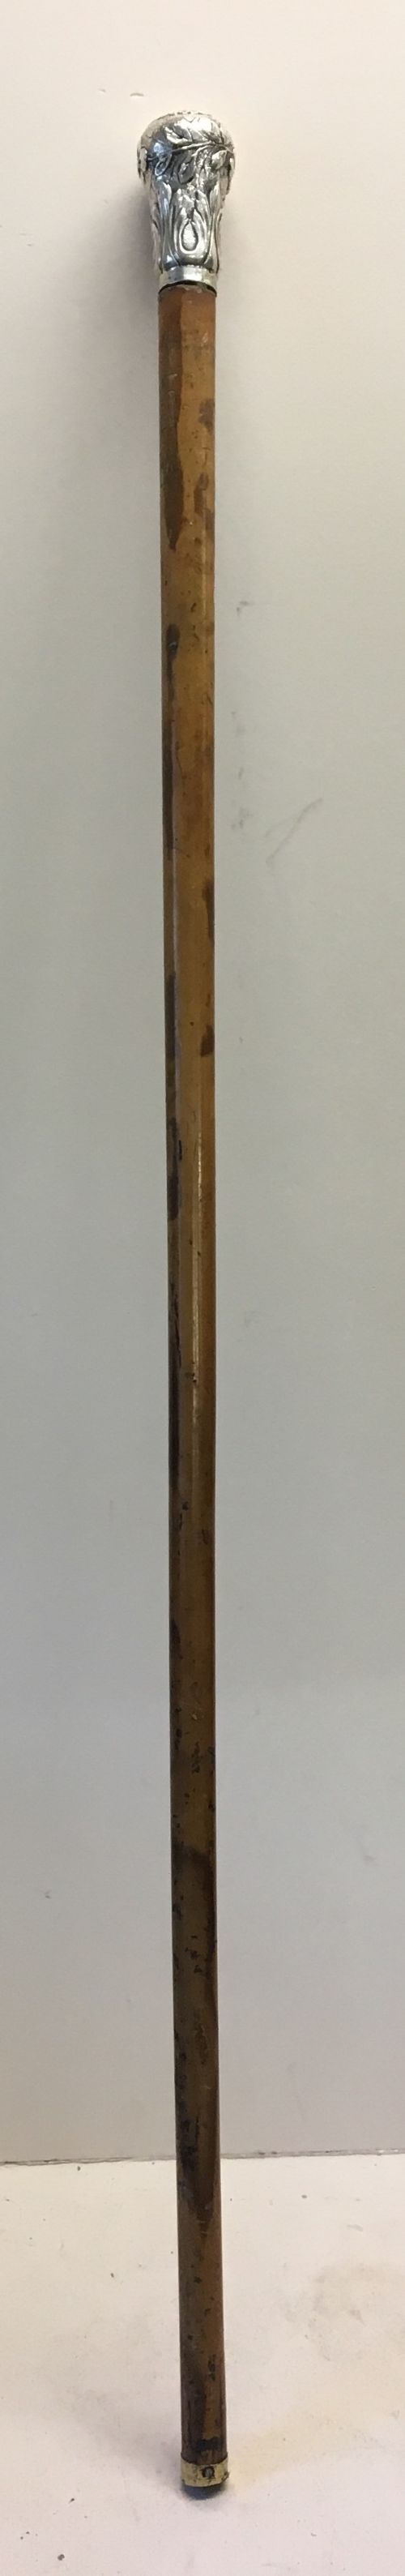 c19th walking cane with white metal embossed handle